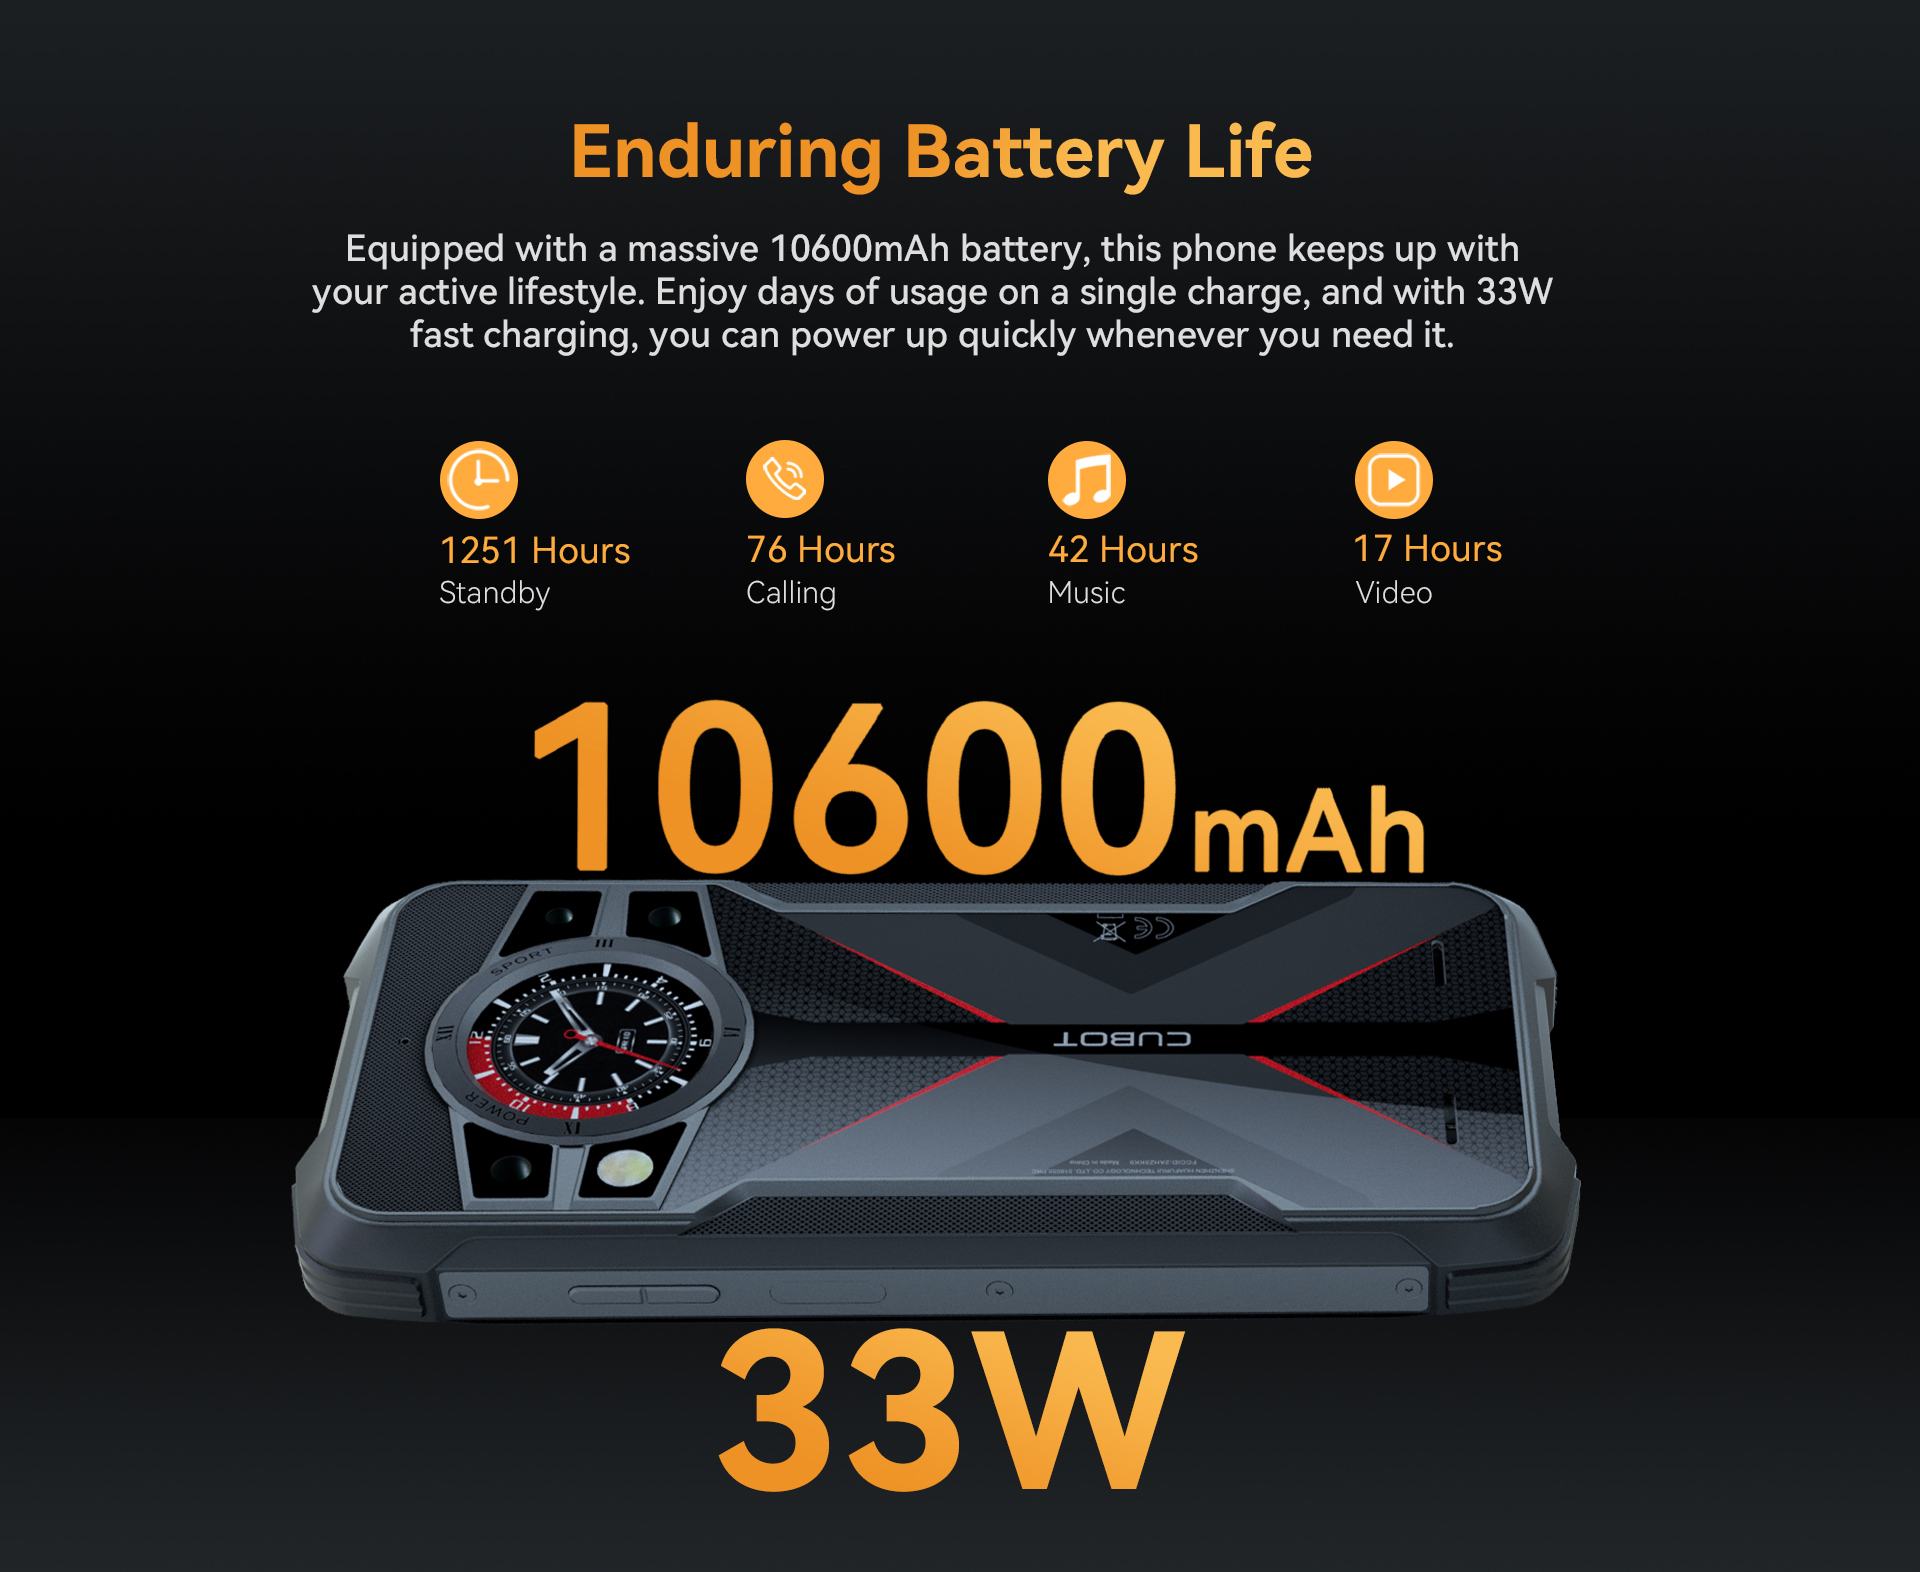 Cubot KingKong 9 is unveiled with a 10600 mAh battery and 33W fast charging